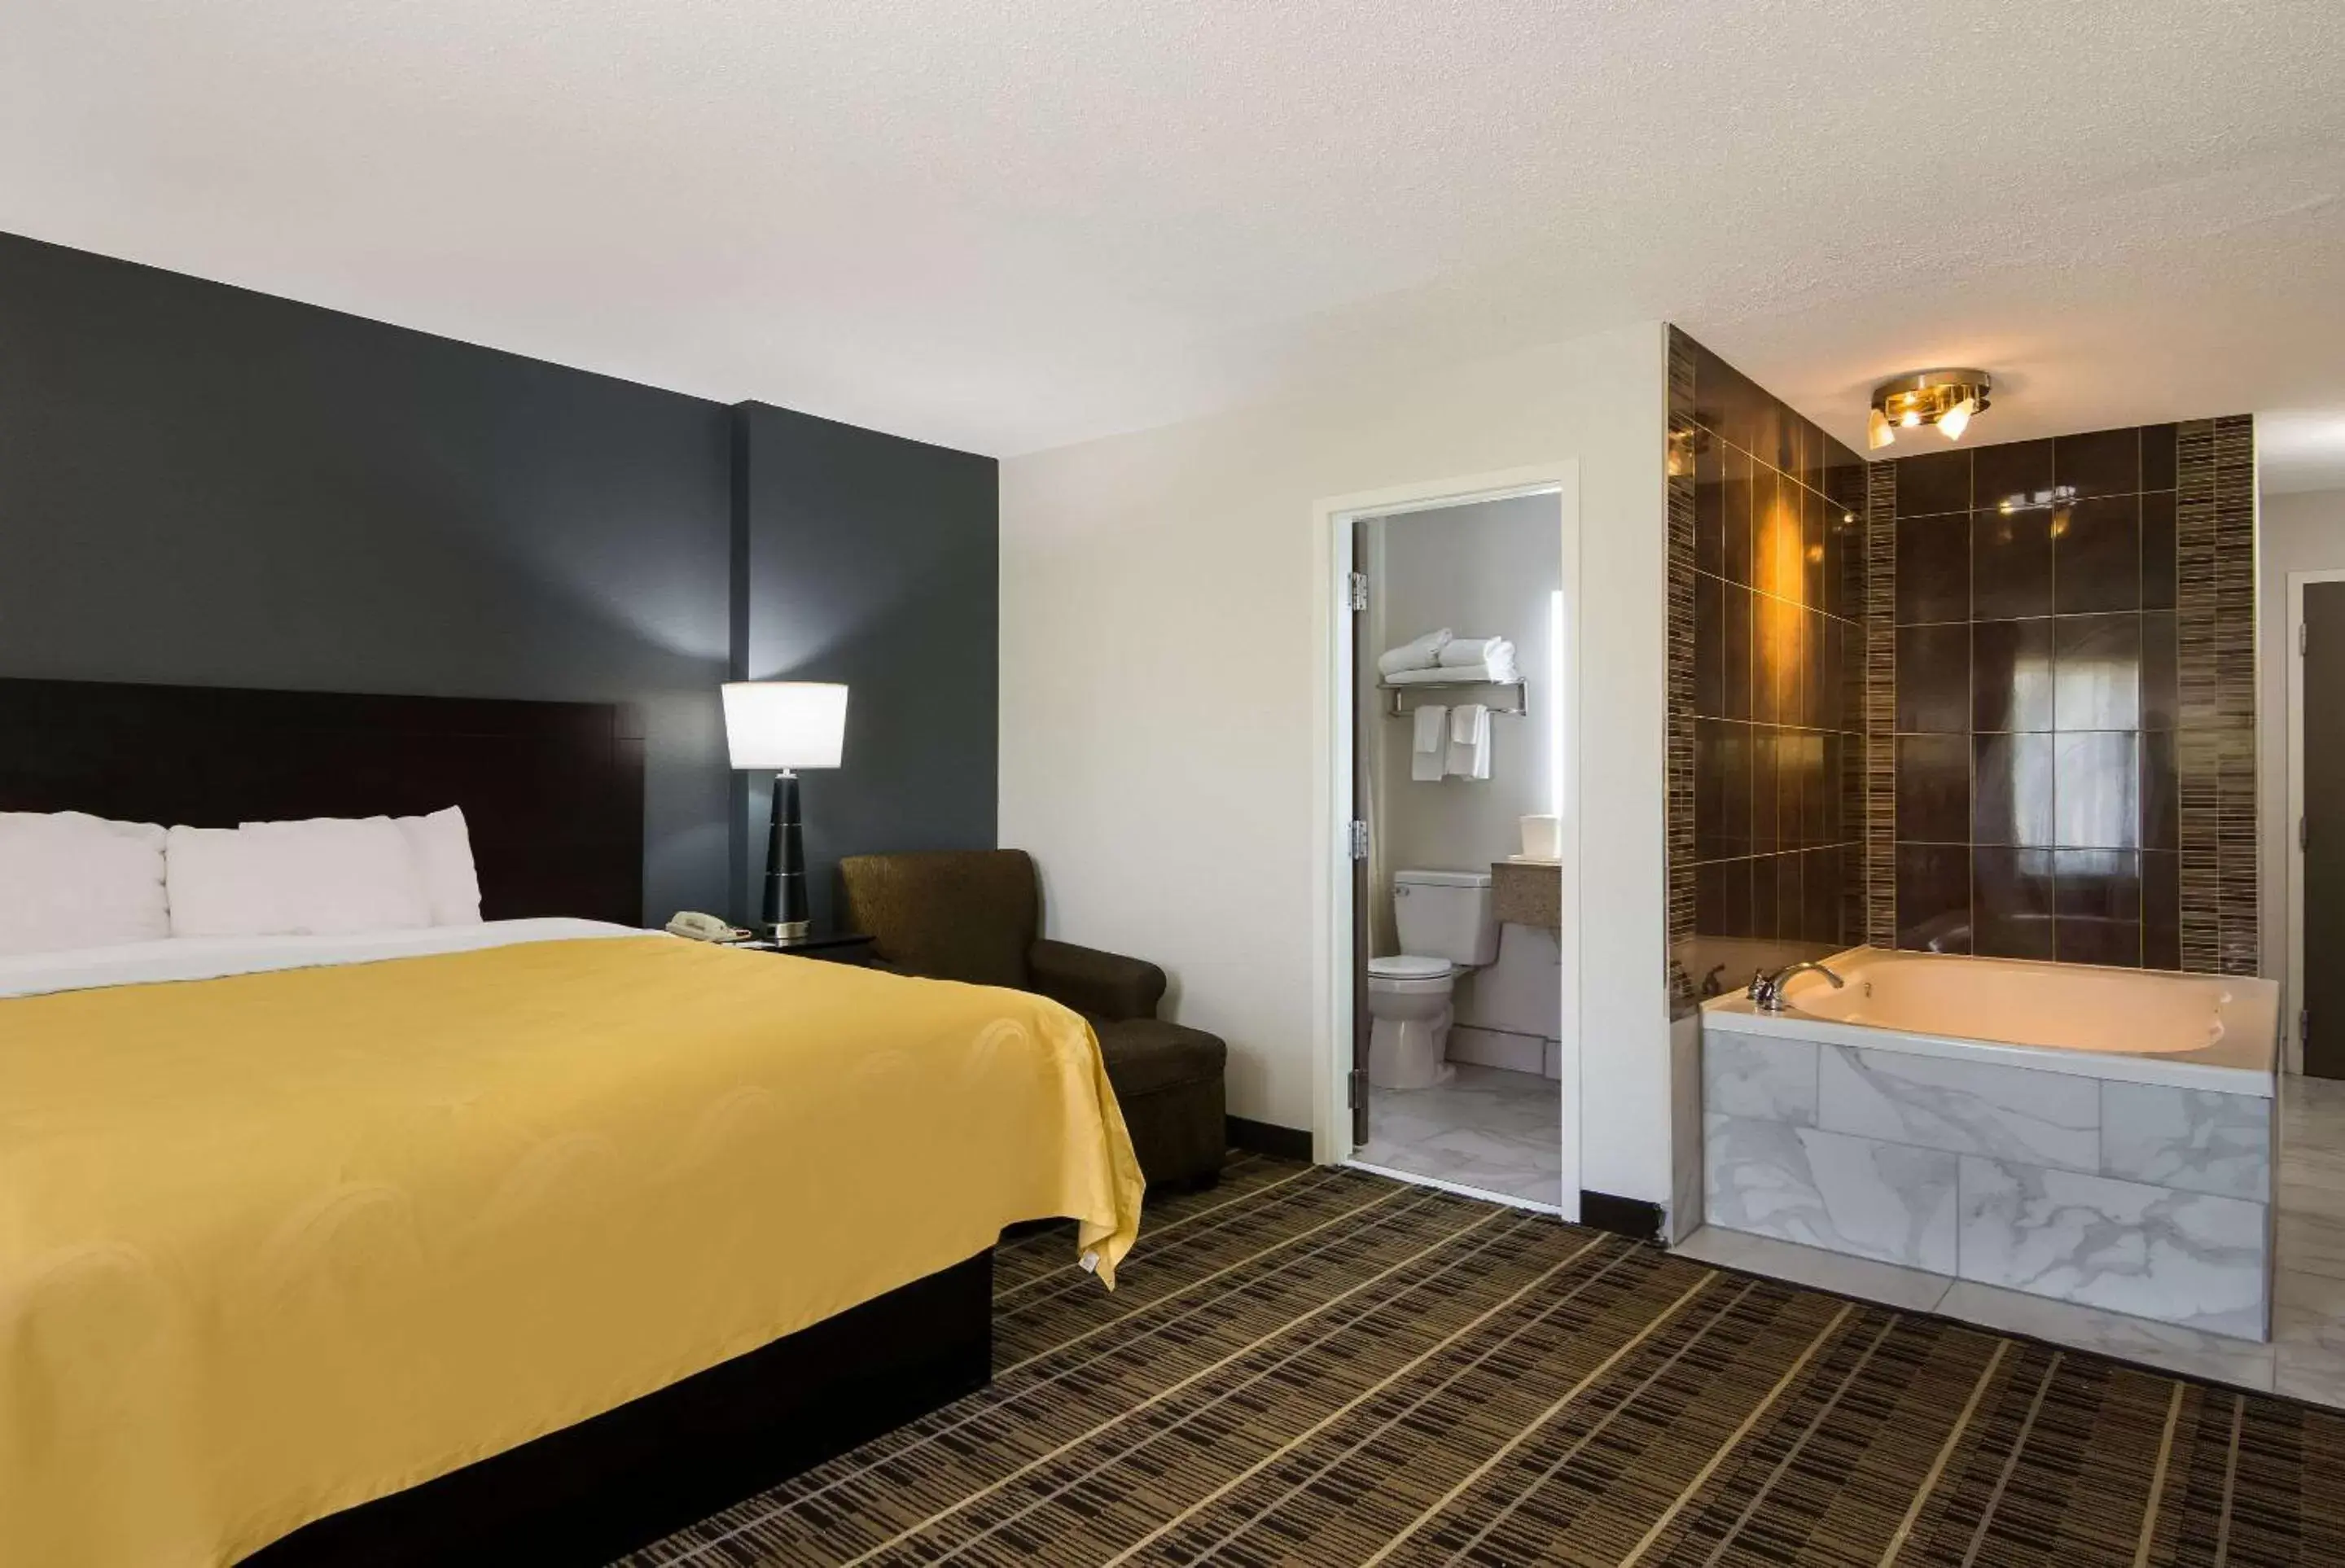 Bedroom, Bed in Quality Inn Aurora - Naperville Area